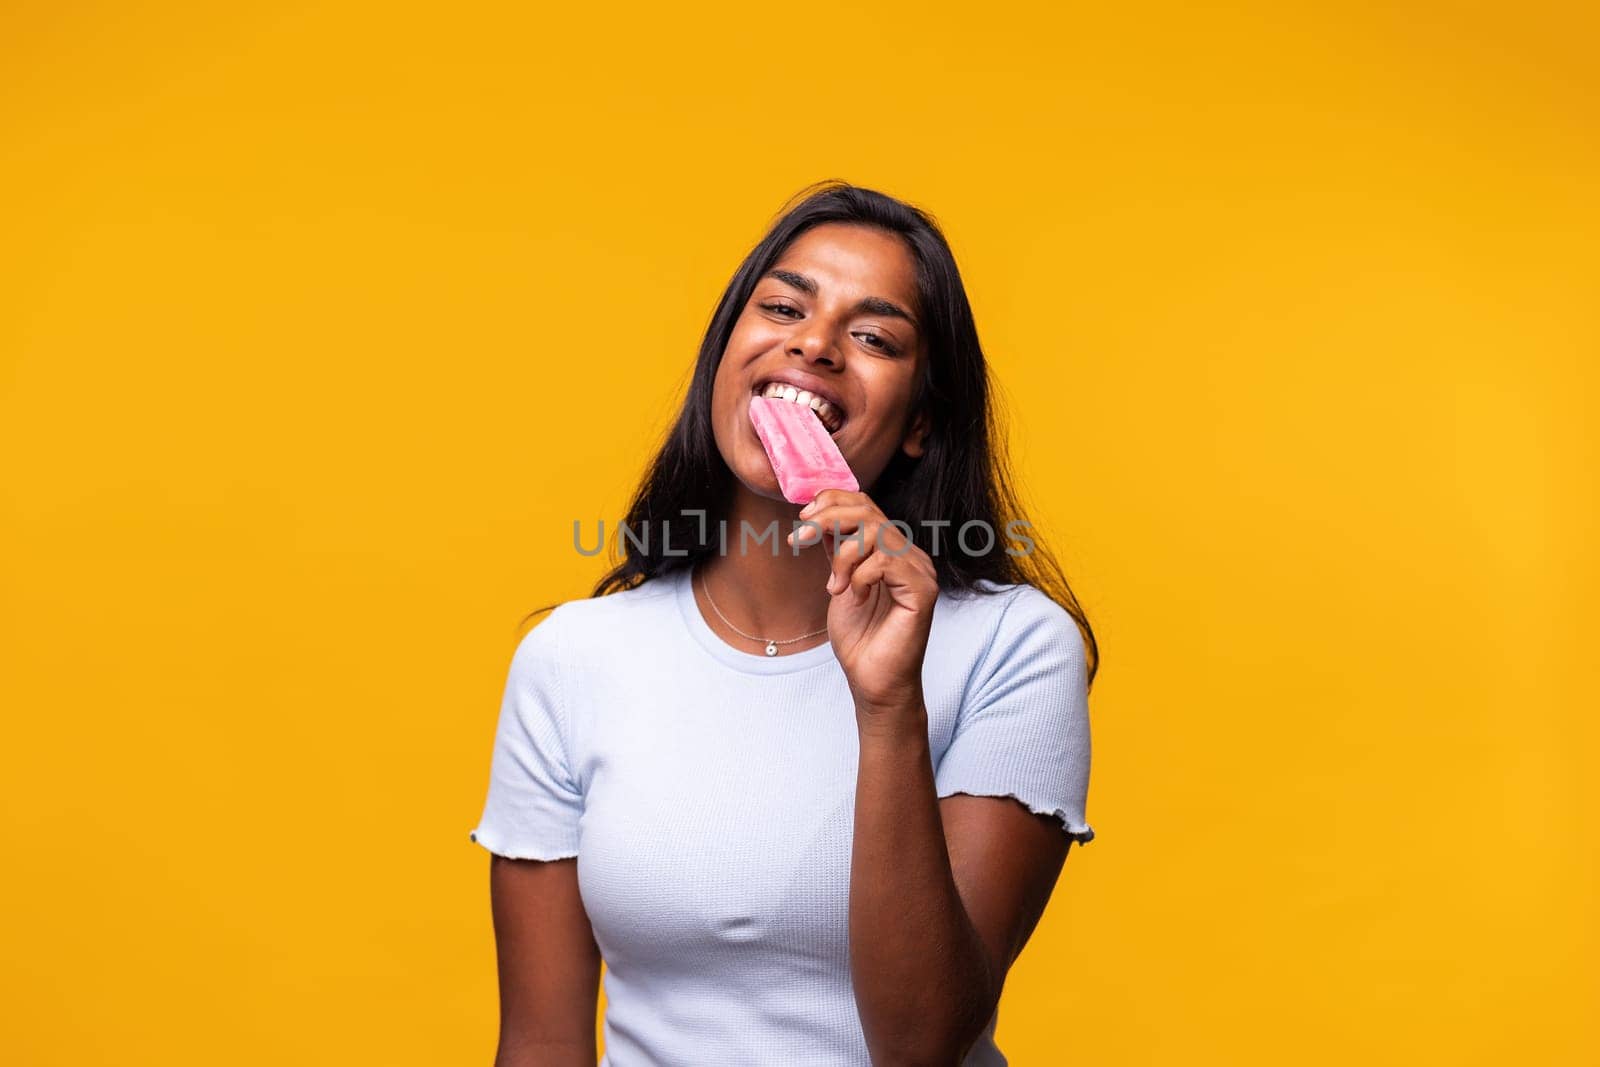 Young Indian woman eating pink popsicle on yellow background. Asian woman eating ice cream. Looking at camera. Studio shot.